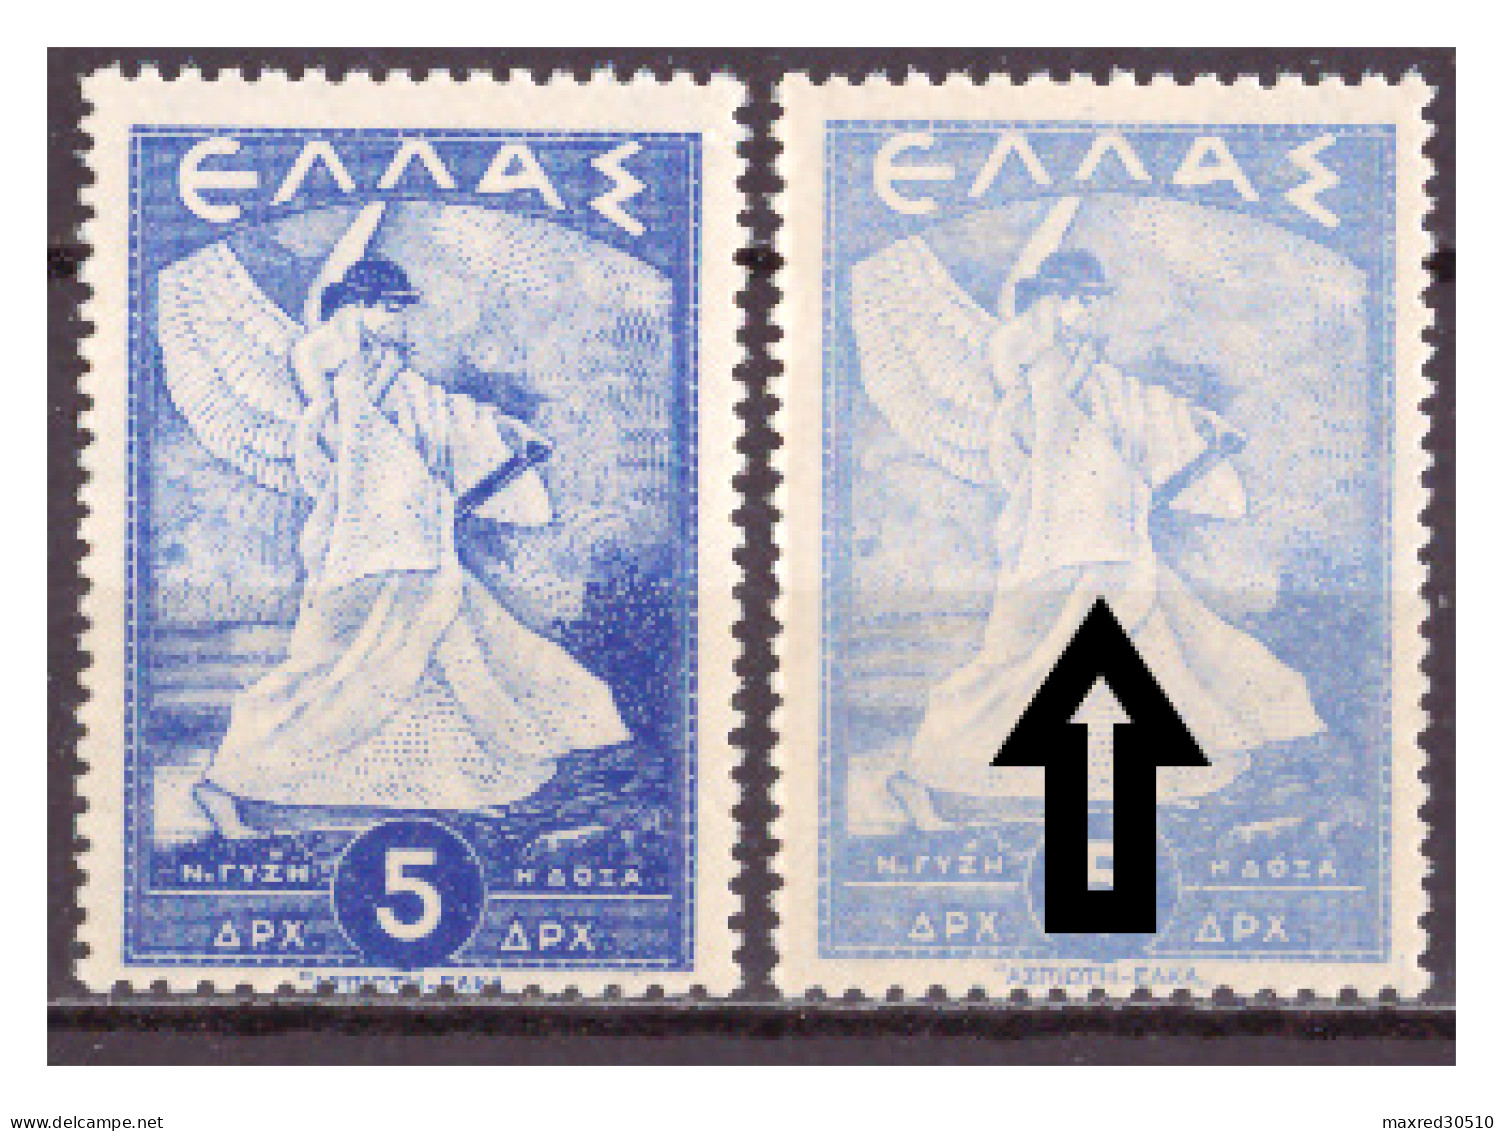 GREECE 1945 2X5L. OF THE "GLORY ISSUE" THE 2ND ONE (SEE ARROW) WITH CLEAR COLOR DIFFERENCE ERROR MNH - Varietà & Curiosità